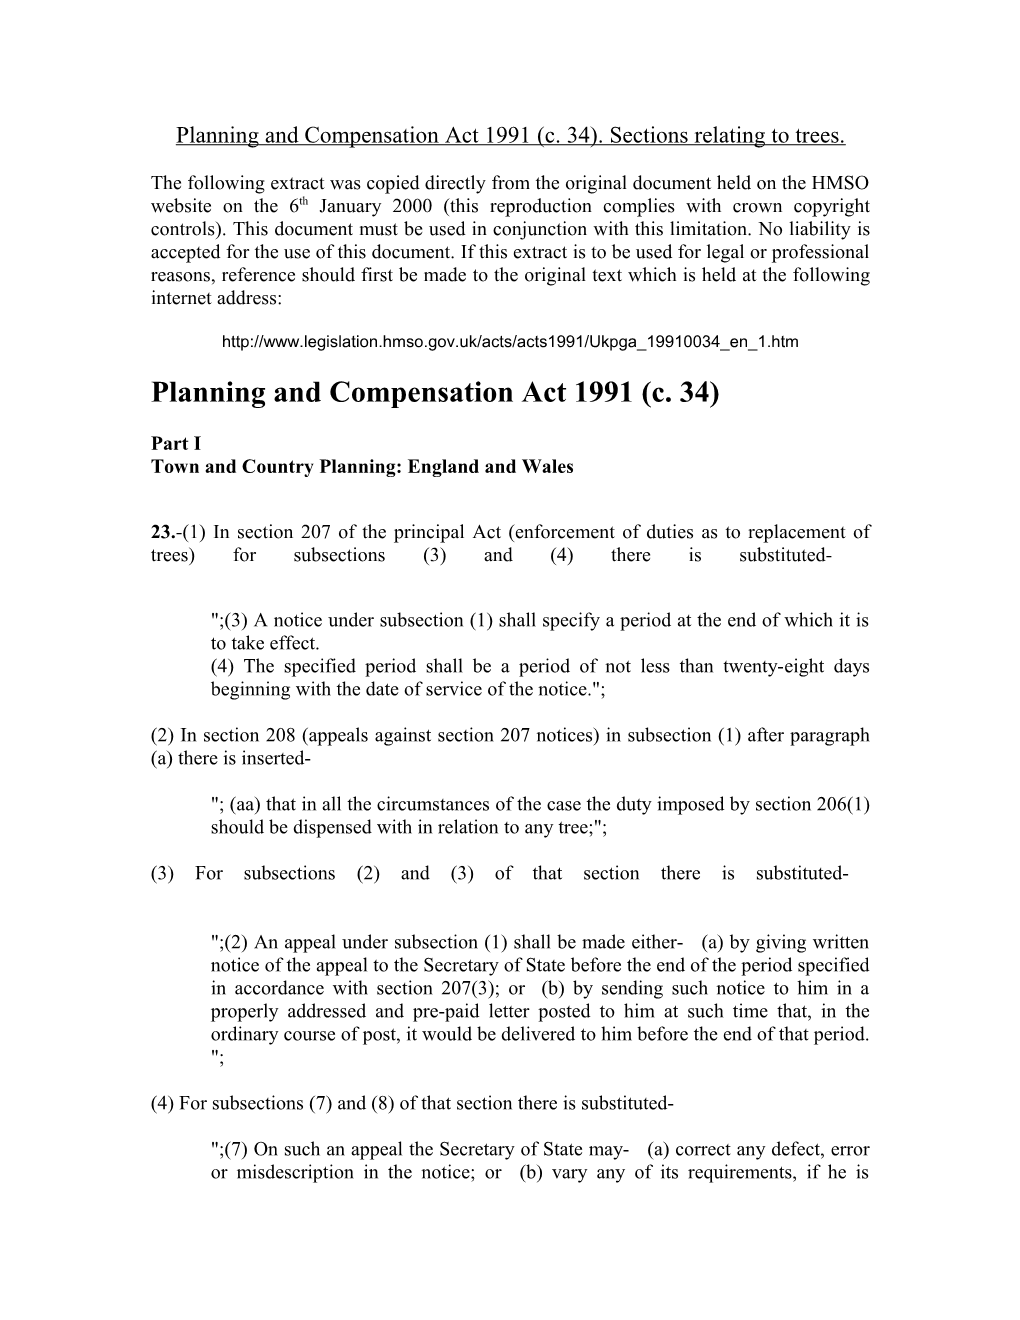 Planning and Compensation Act 1991 (C